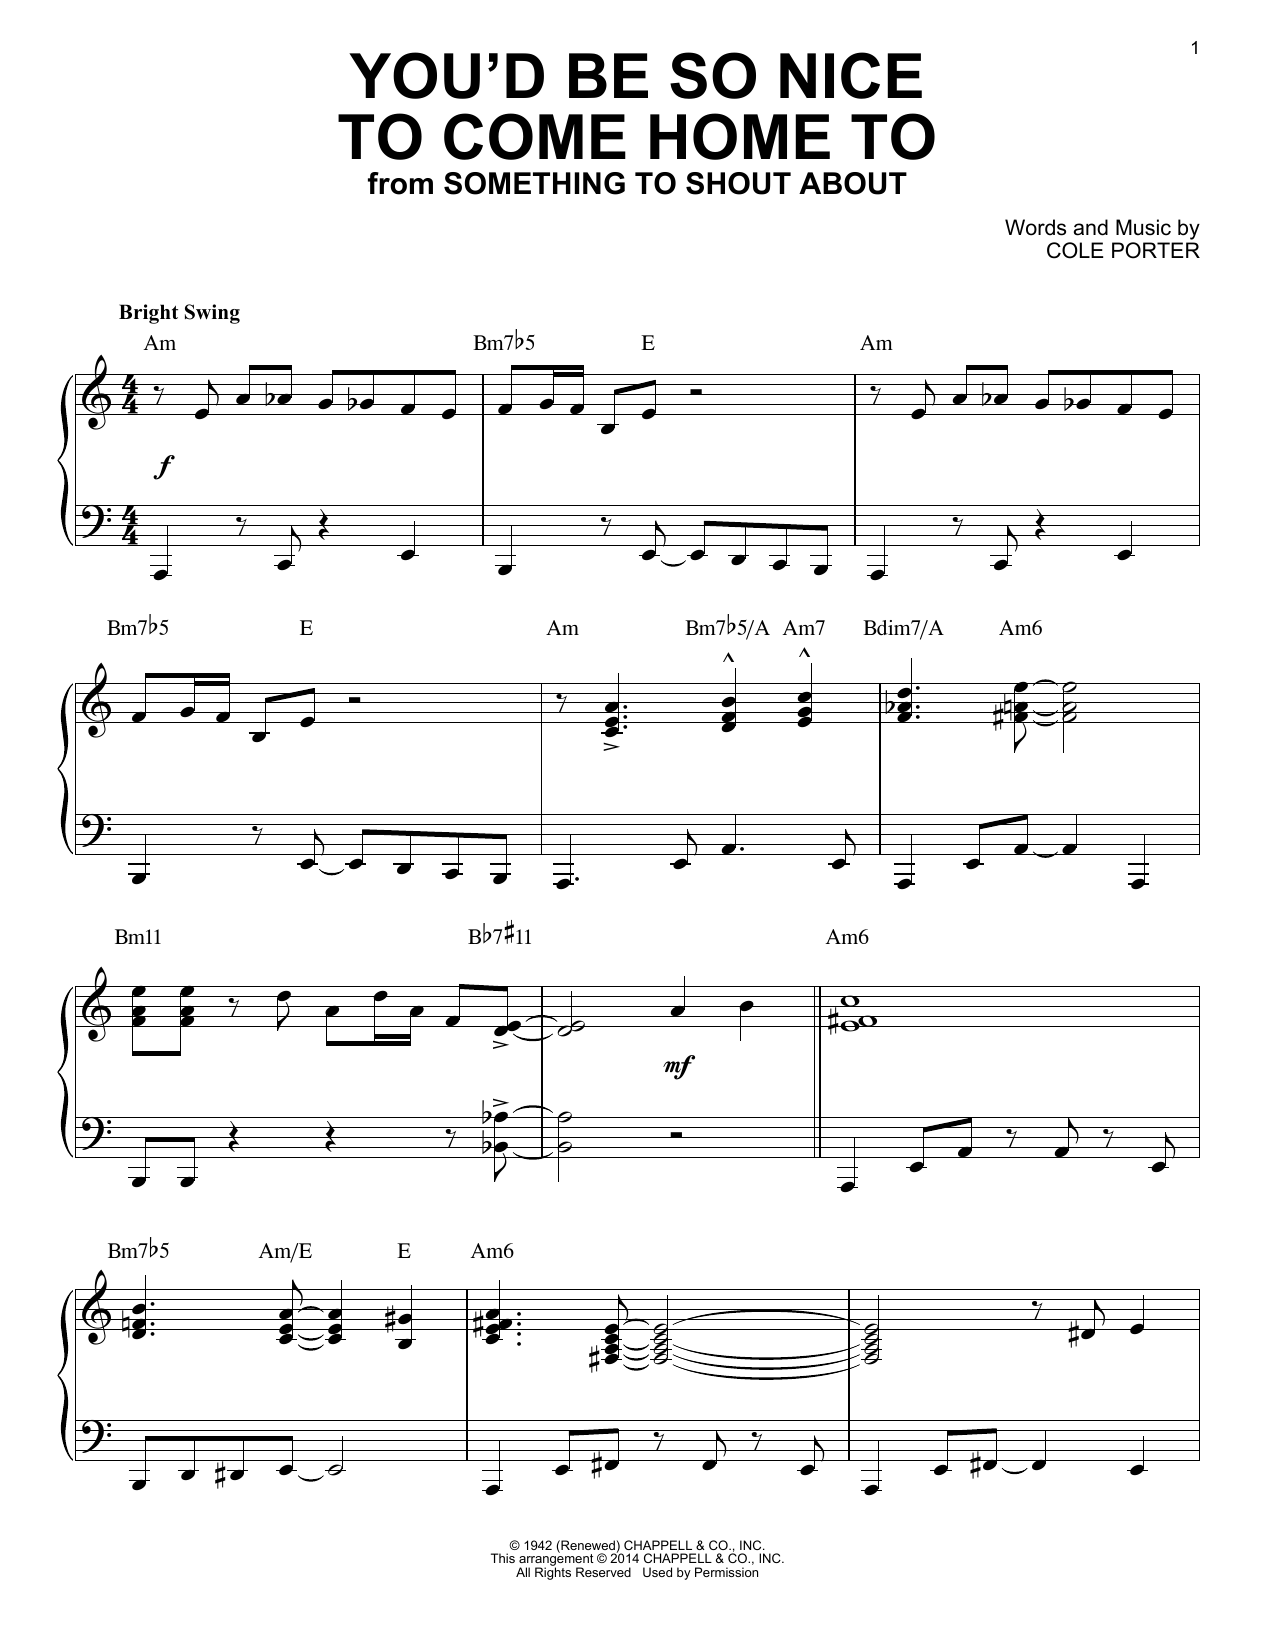 Cole Porter You'd Be So Nice To Come Home To [Jazz version] (arr. Brent Edstrom) sheet music notes and chords. Download Printable PDF.